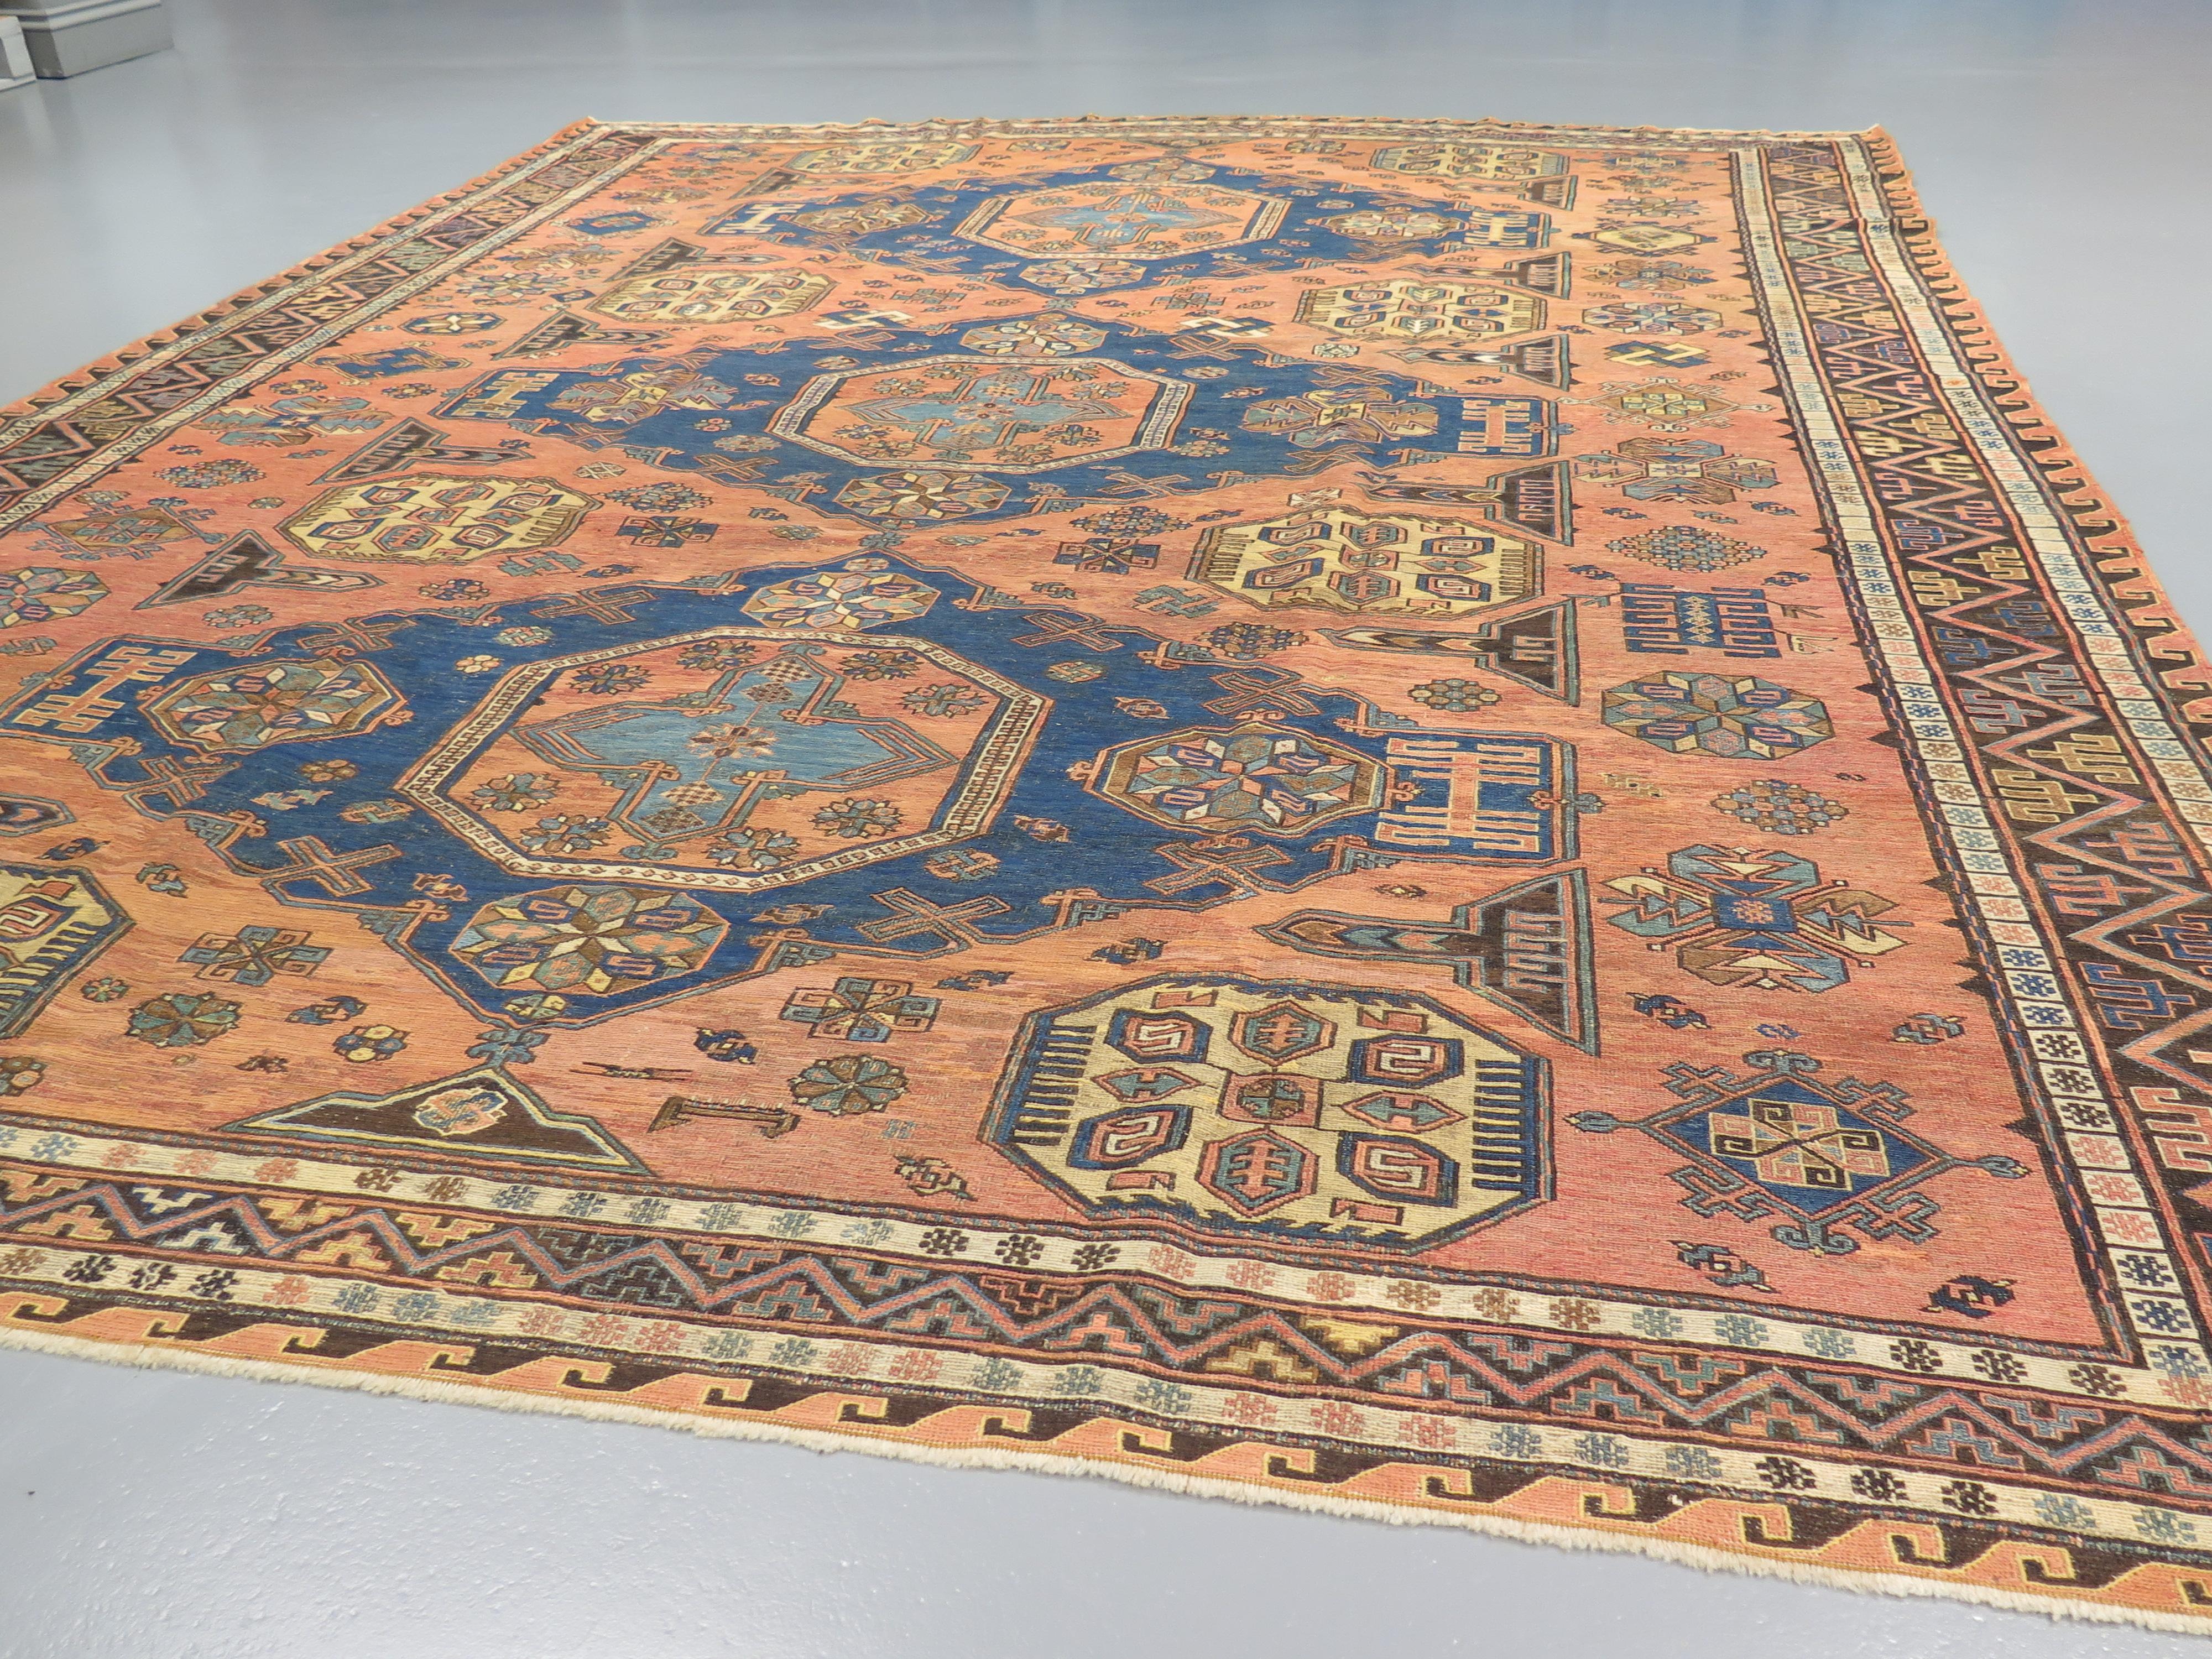 Antique Soumac flatweaves from the Caucasus are exceptionally durable: stronger and longer lasting than a kilim rug. These pieces are extraordinarily finely woven, showcasing richly detailed motifs, borrowed from ancient tribal symbols native to the